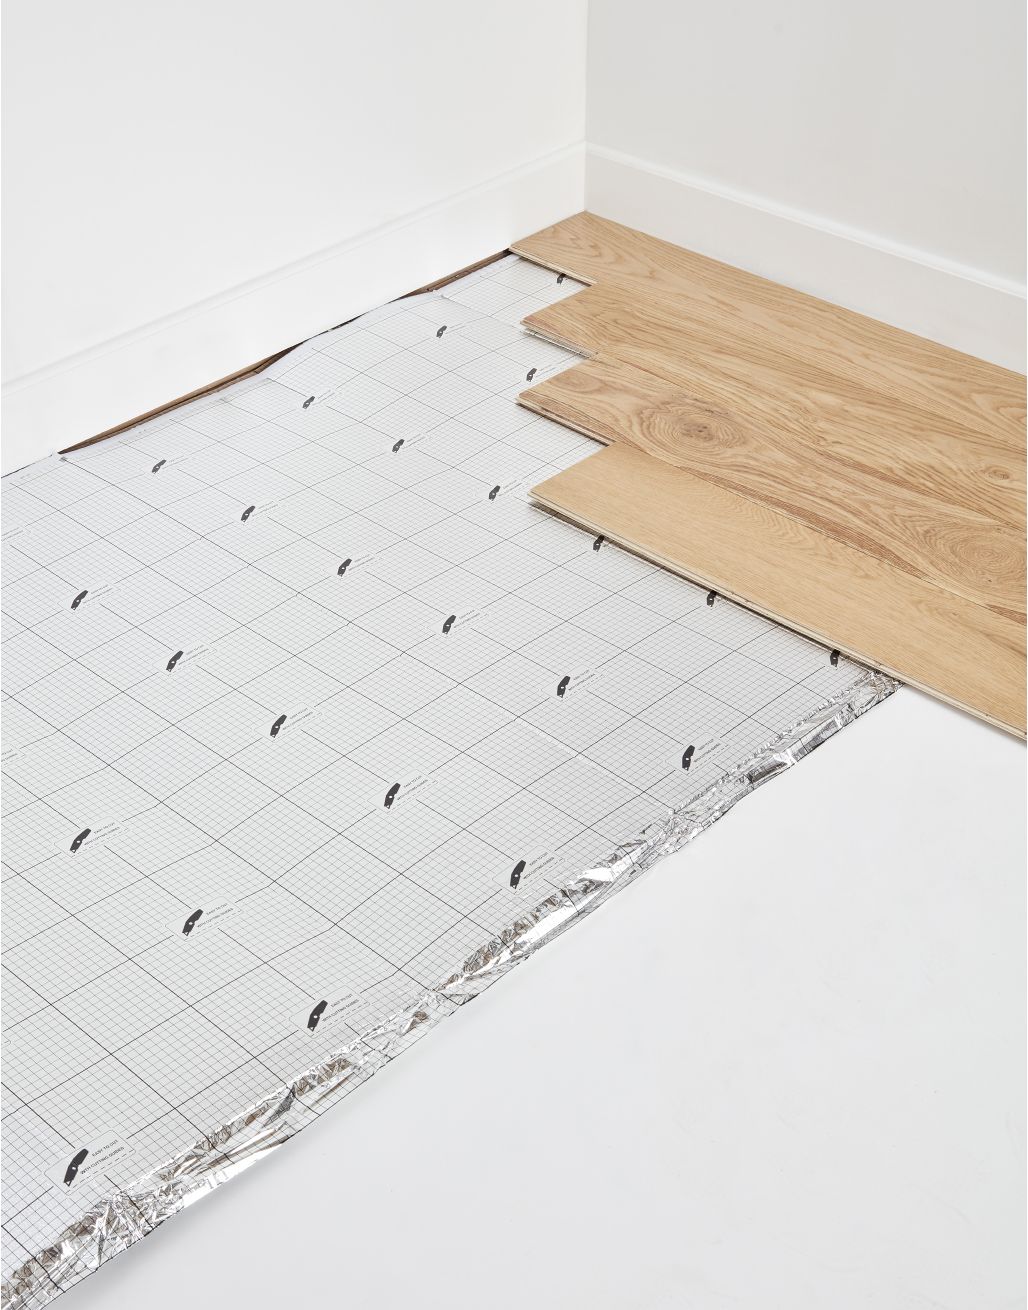 Timberlay Silver Underlay Direct Wood, How Many Floorboards Do I Need Calculator